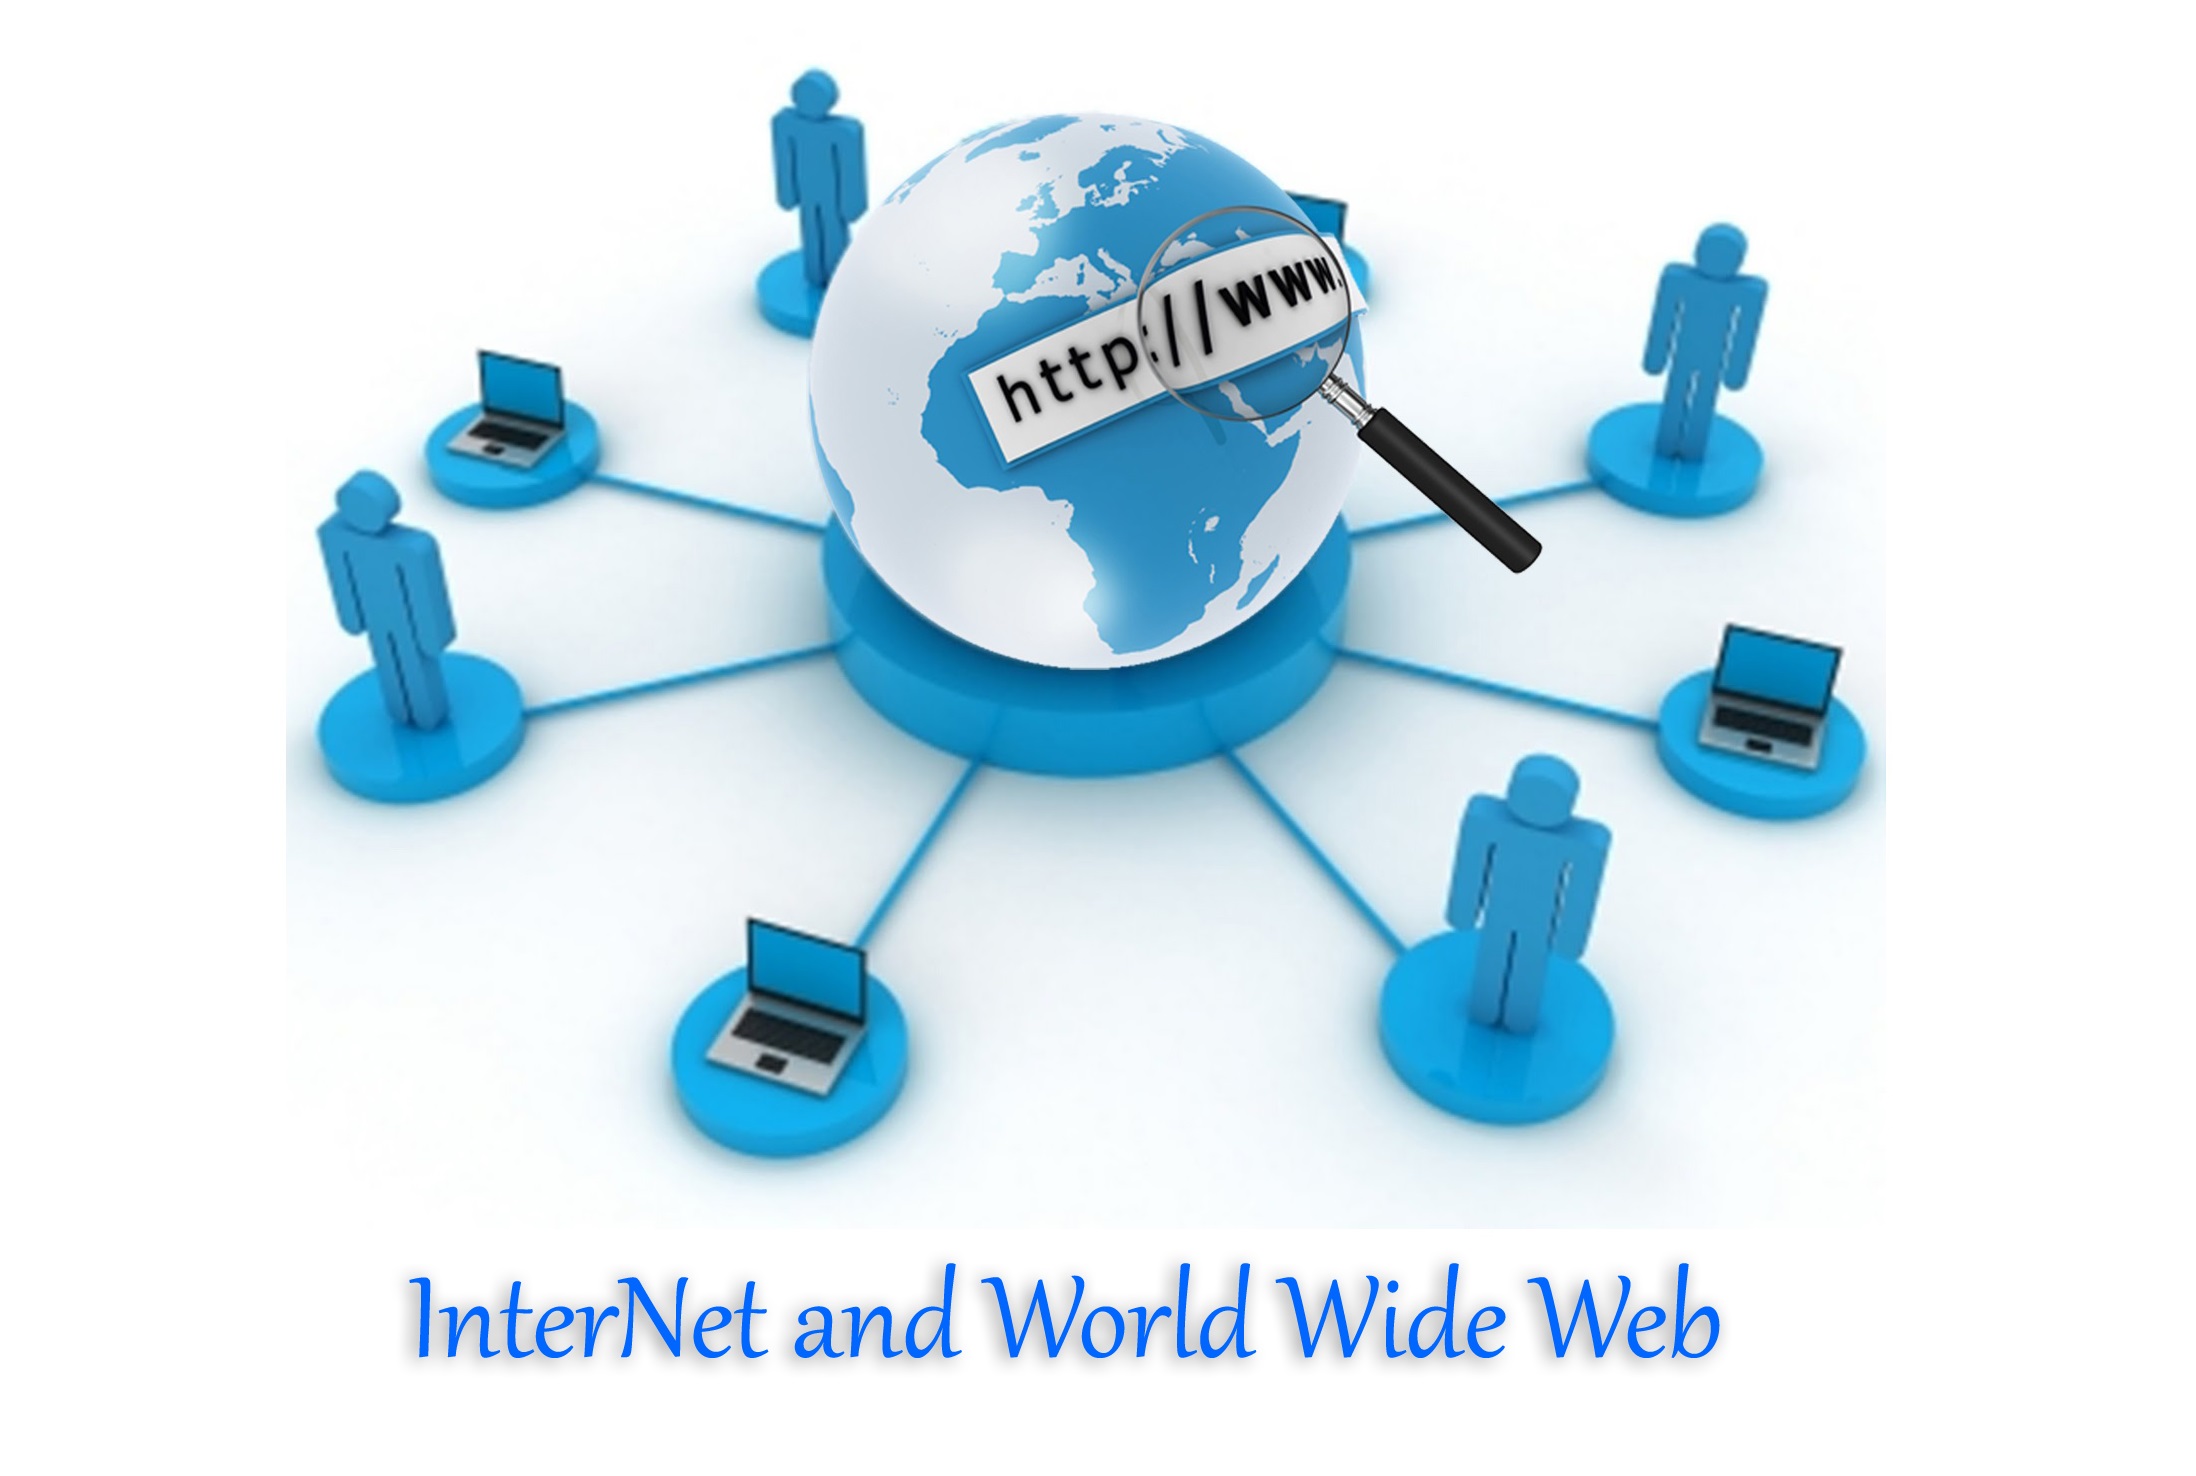 InterNet and World Wide Web